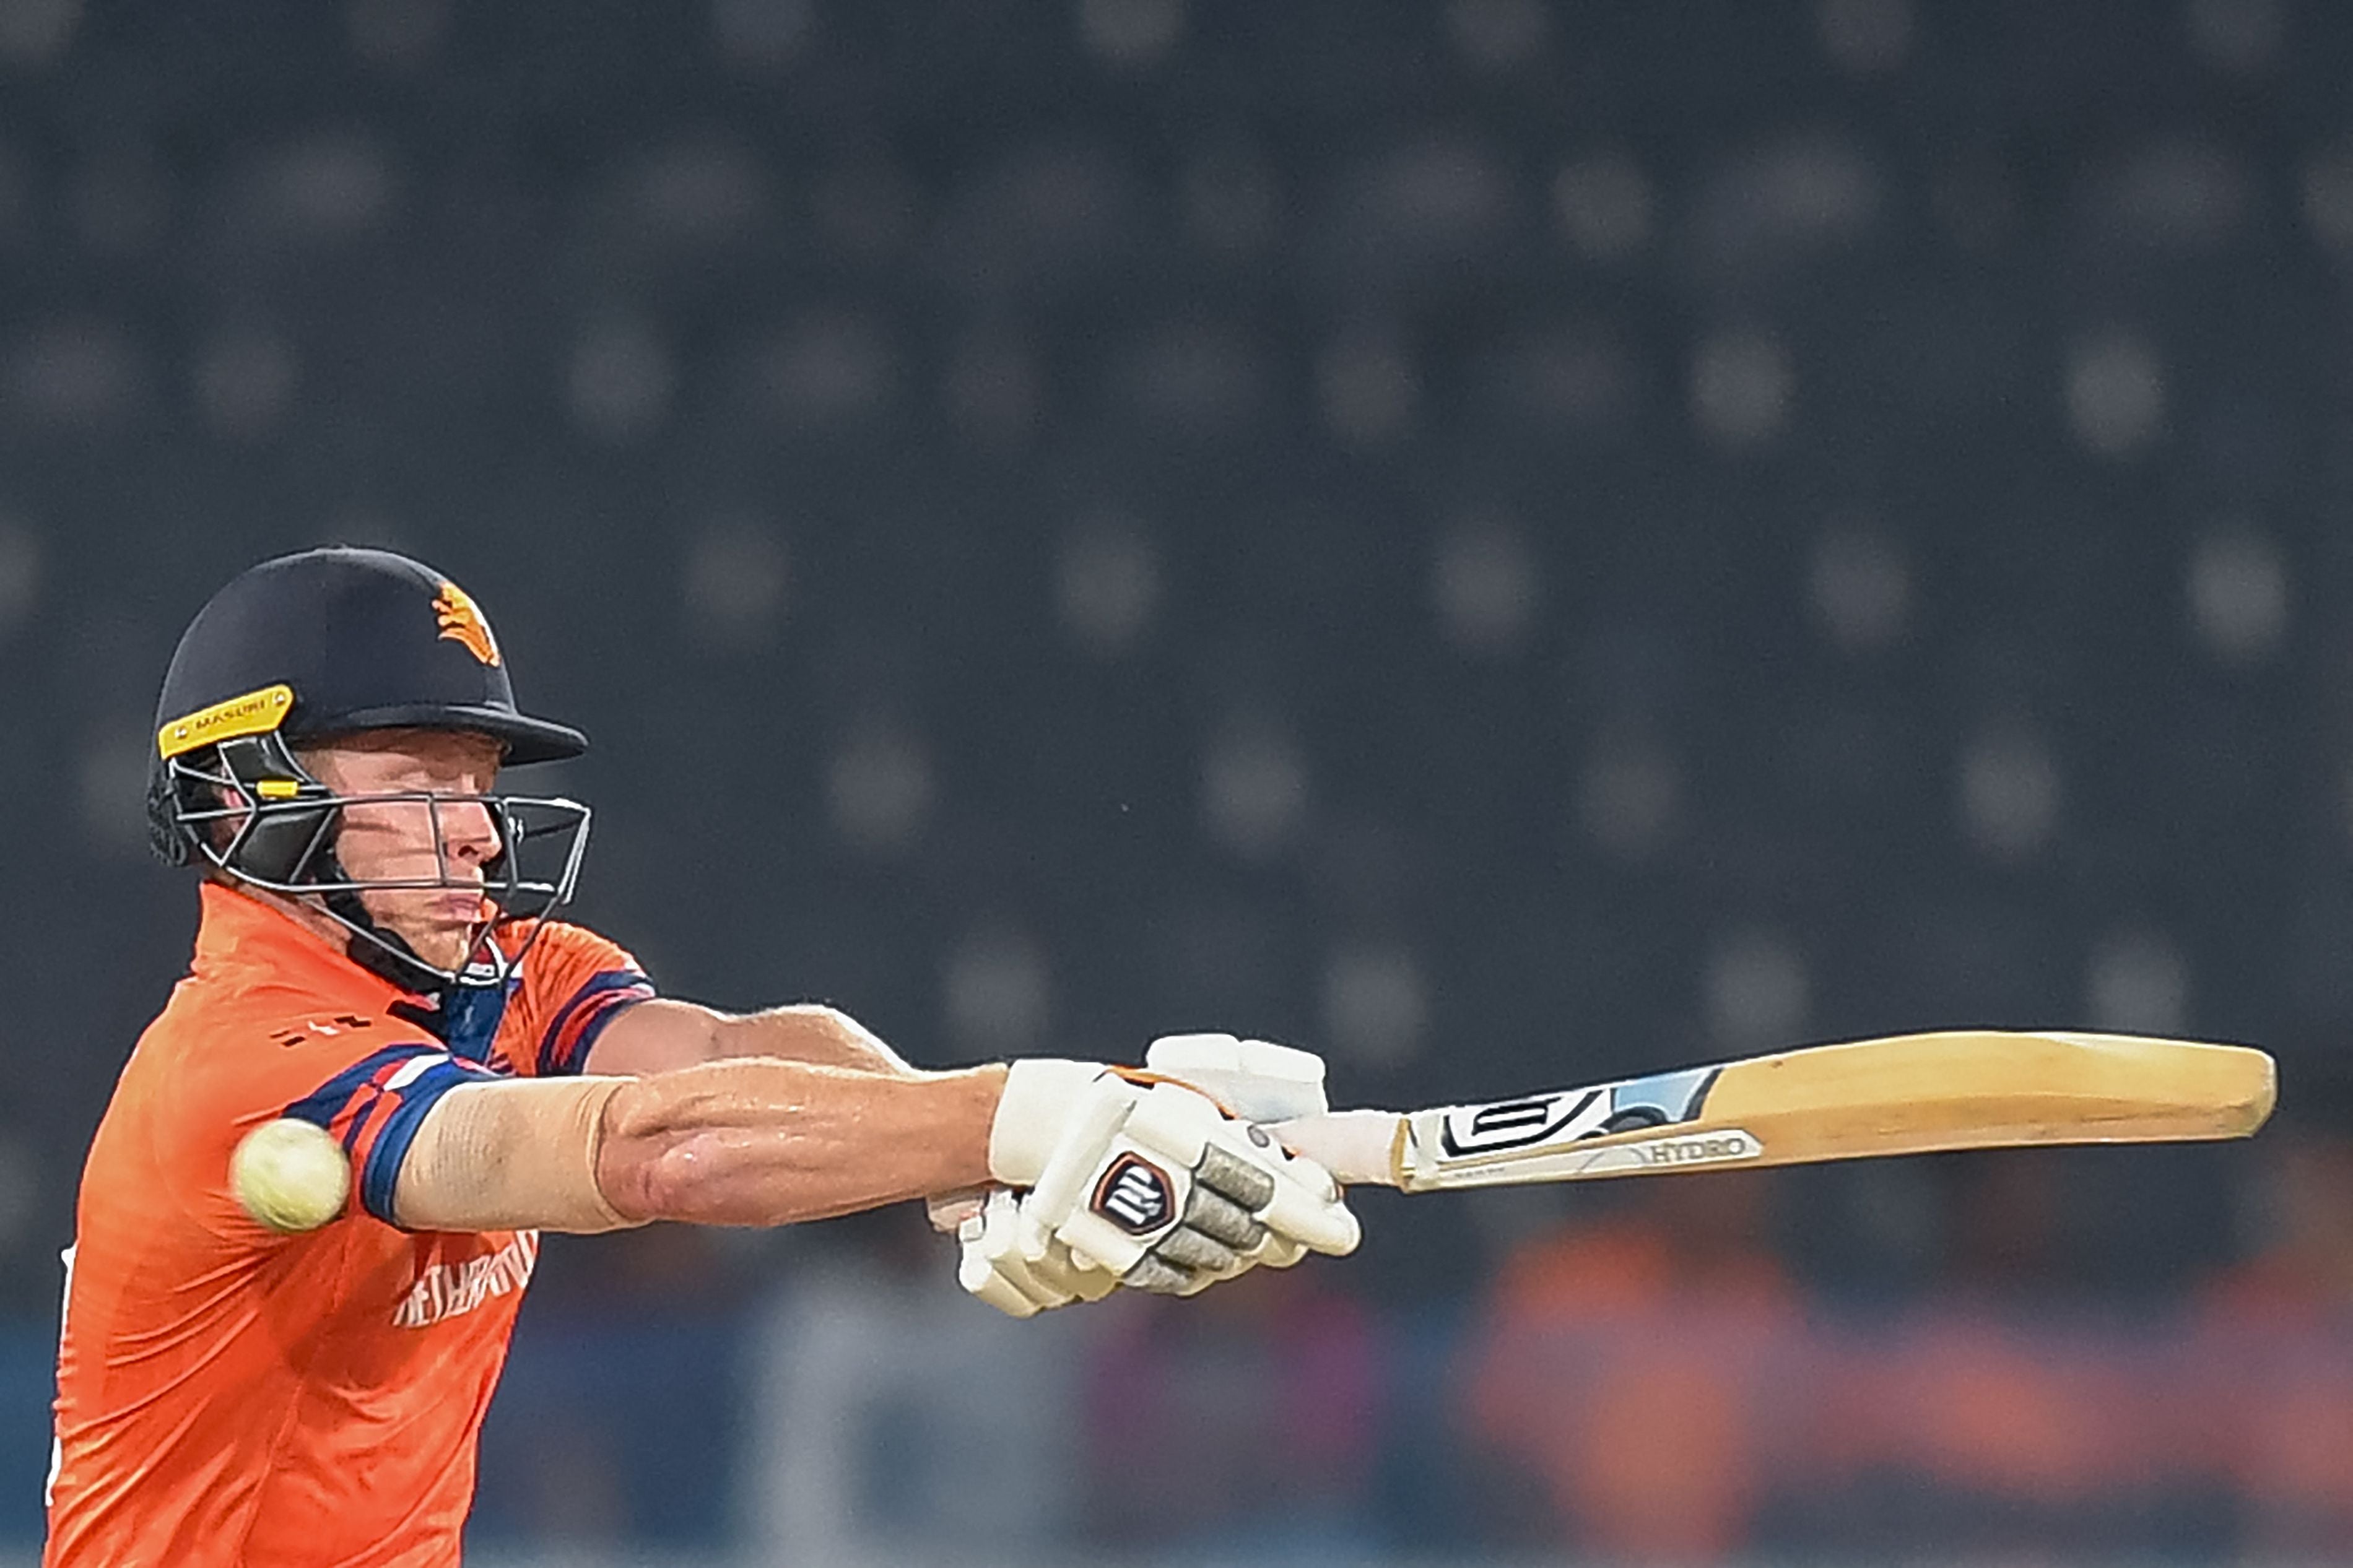 Cricket Training Sex Video - Sybrand Engelbrecht: The Netherlands' latest World Cup recruit who almost  gave up on cricket altogether | The Independent